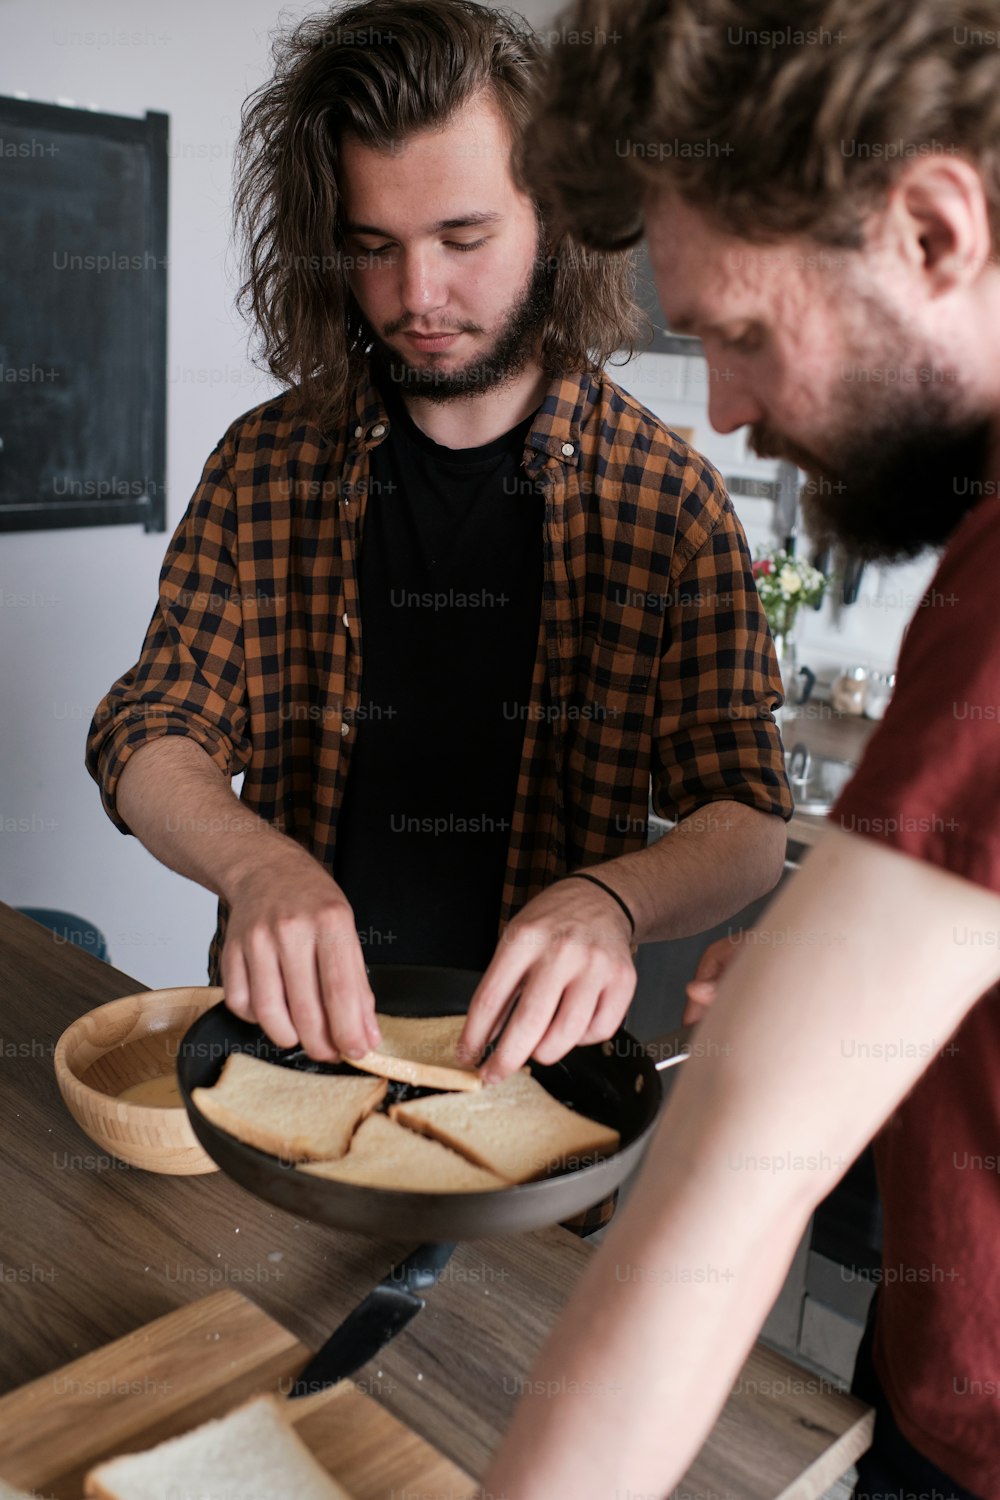 Portrait of two man standing in the kitchen, cooking, making salad. One man is facing camera, another one turned his back